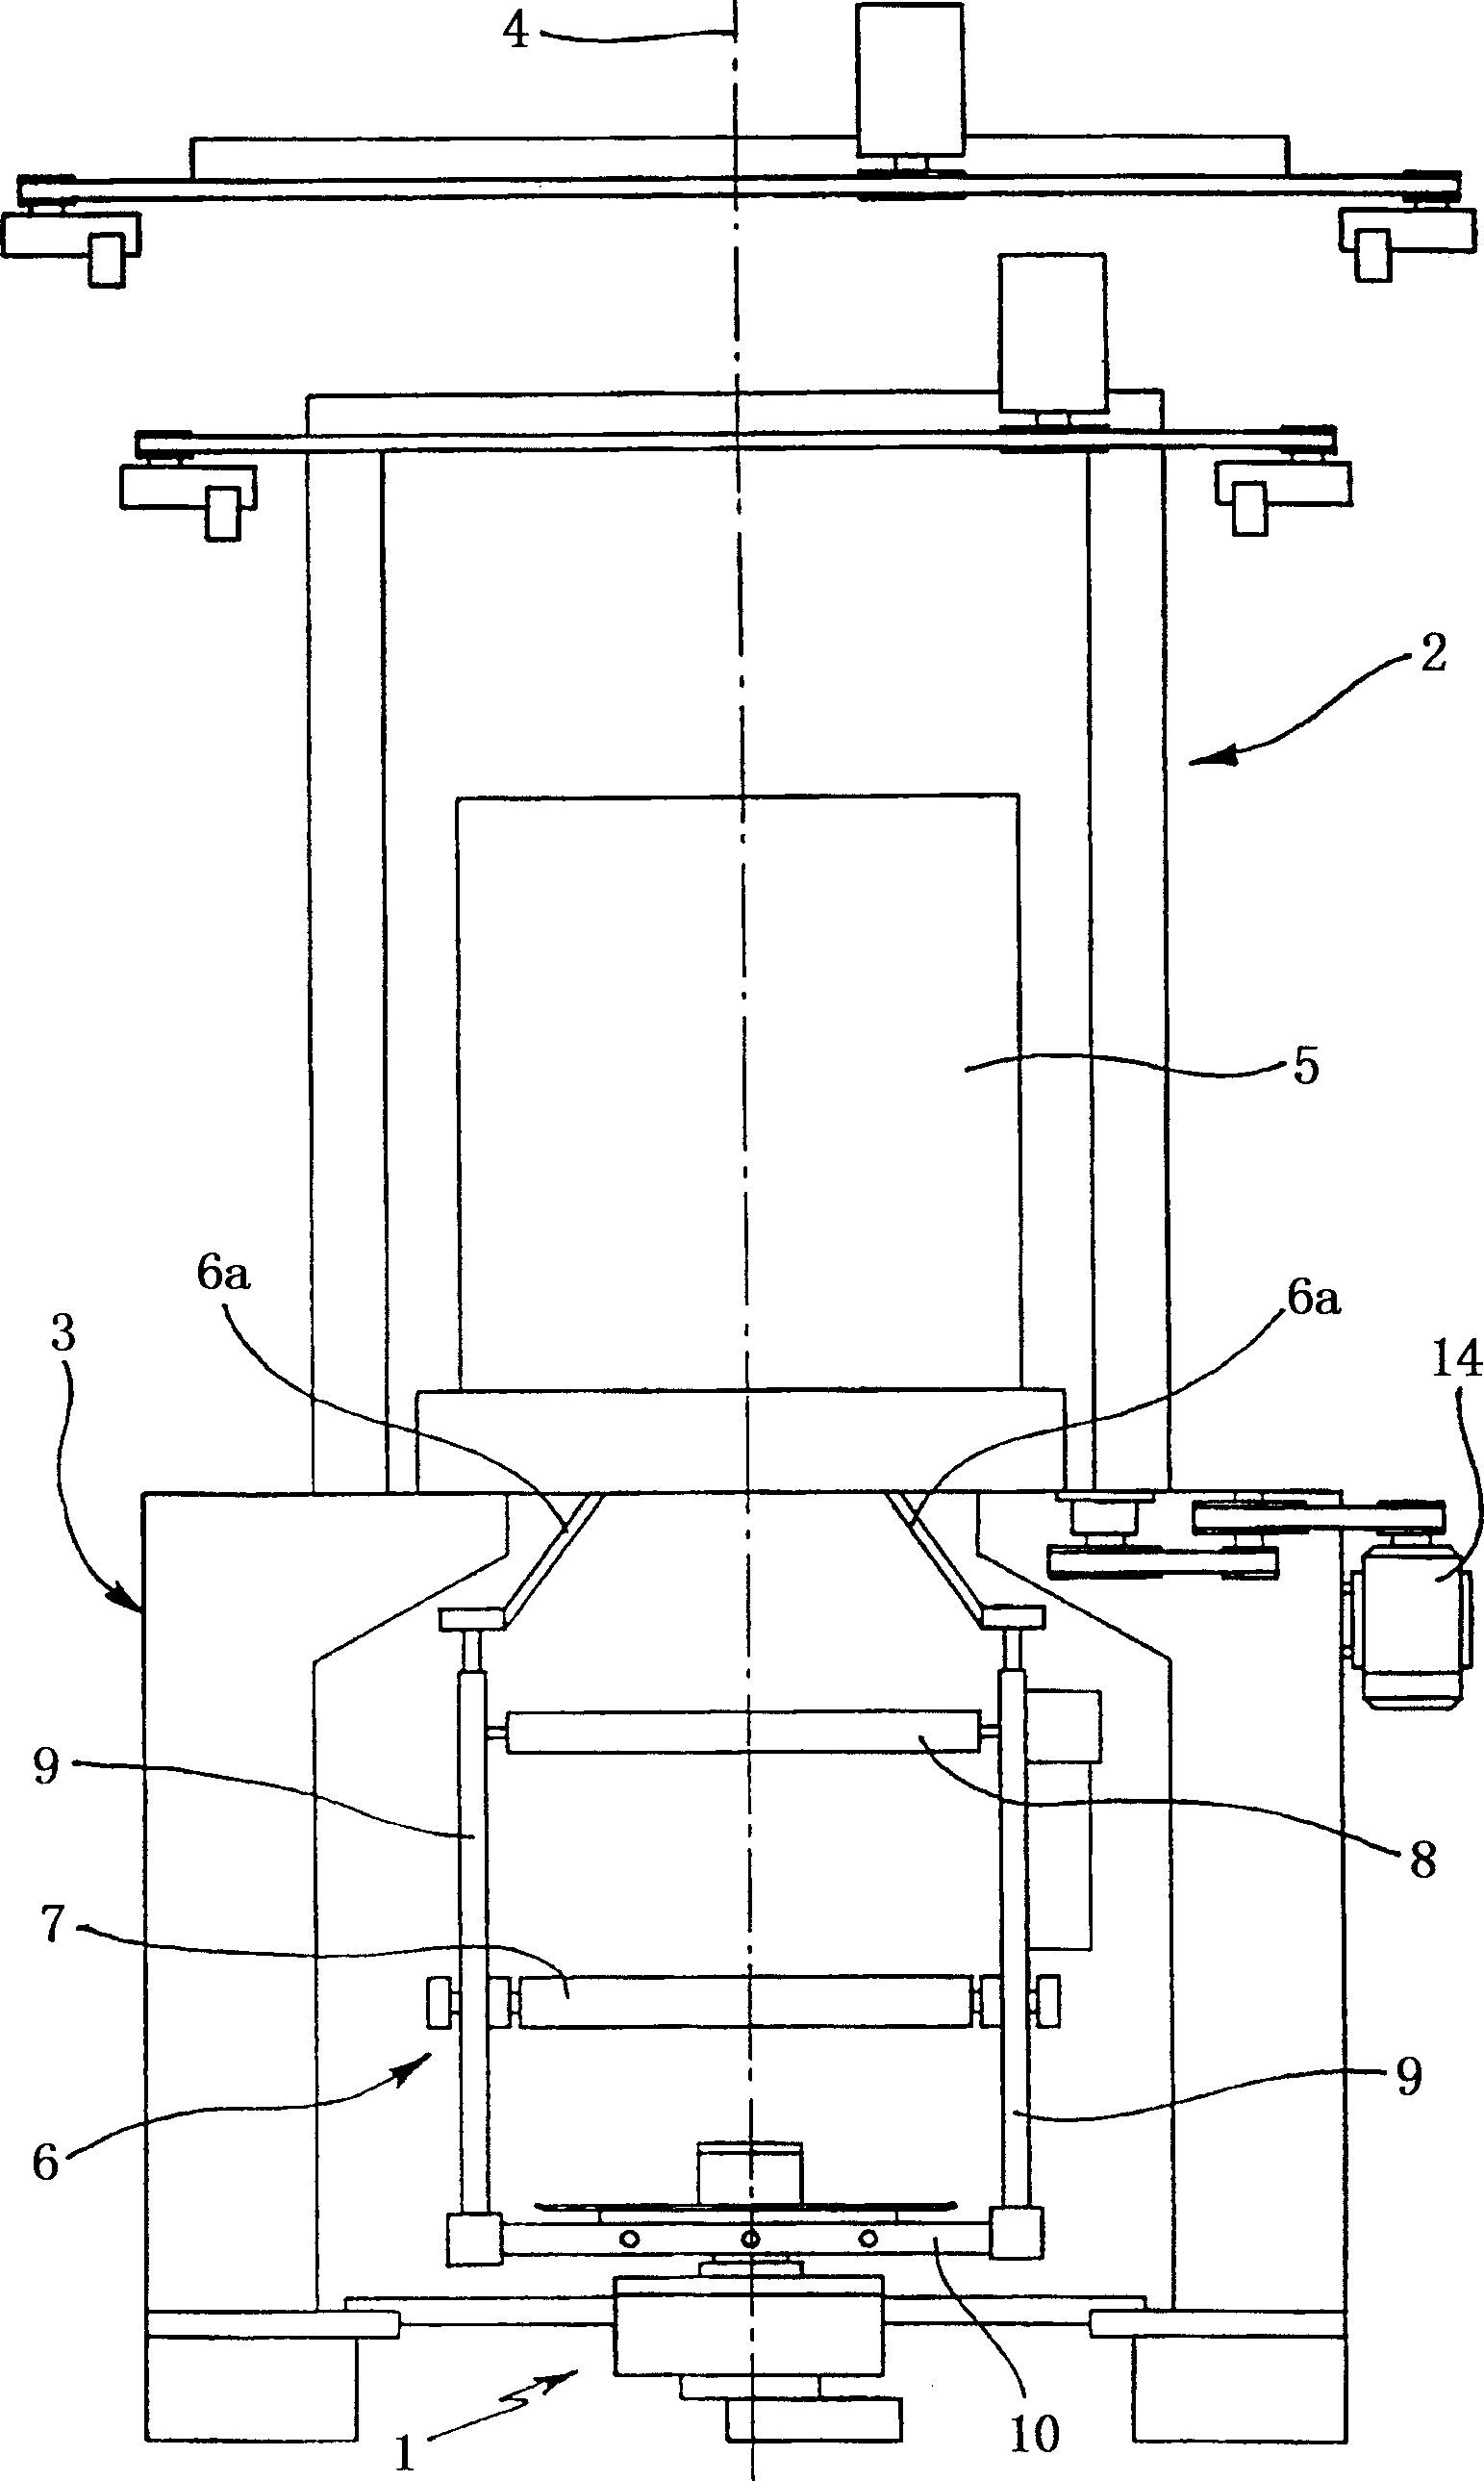 Apparatus and method for controlling weight fabric produced by textile machine, in particular by circular knitting machine